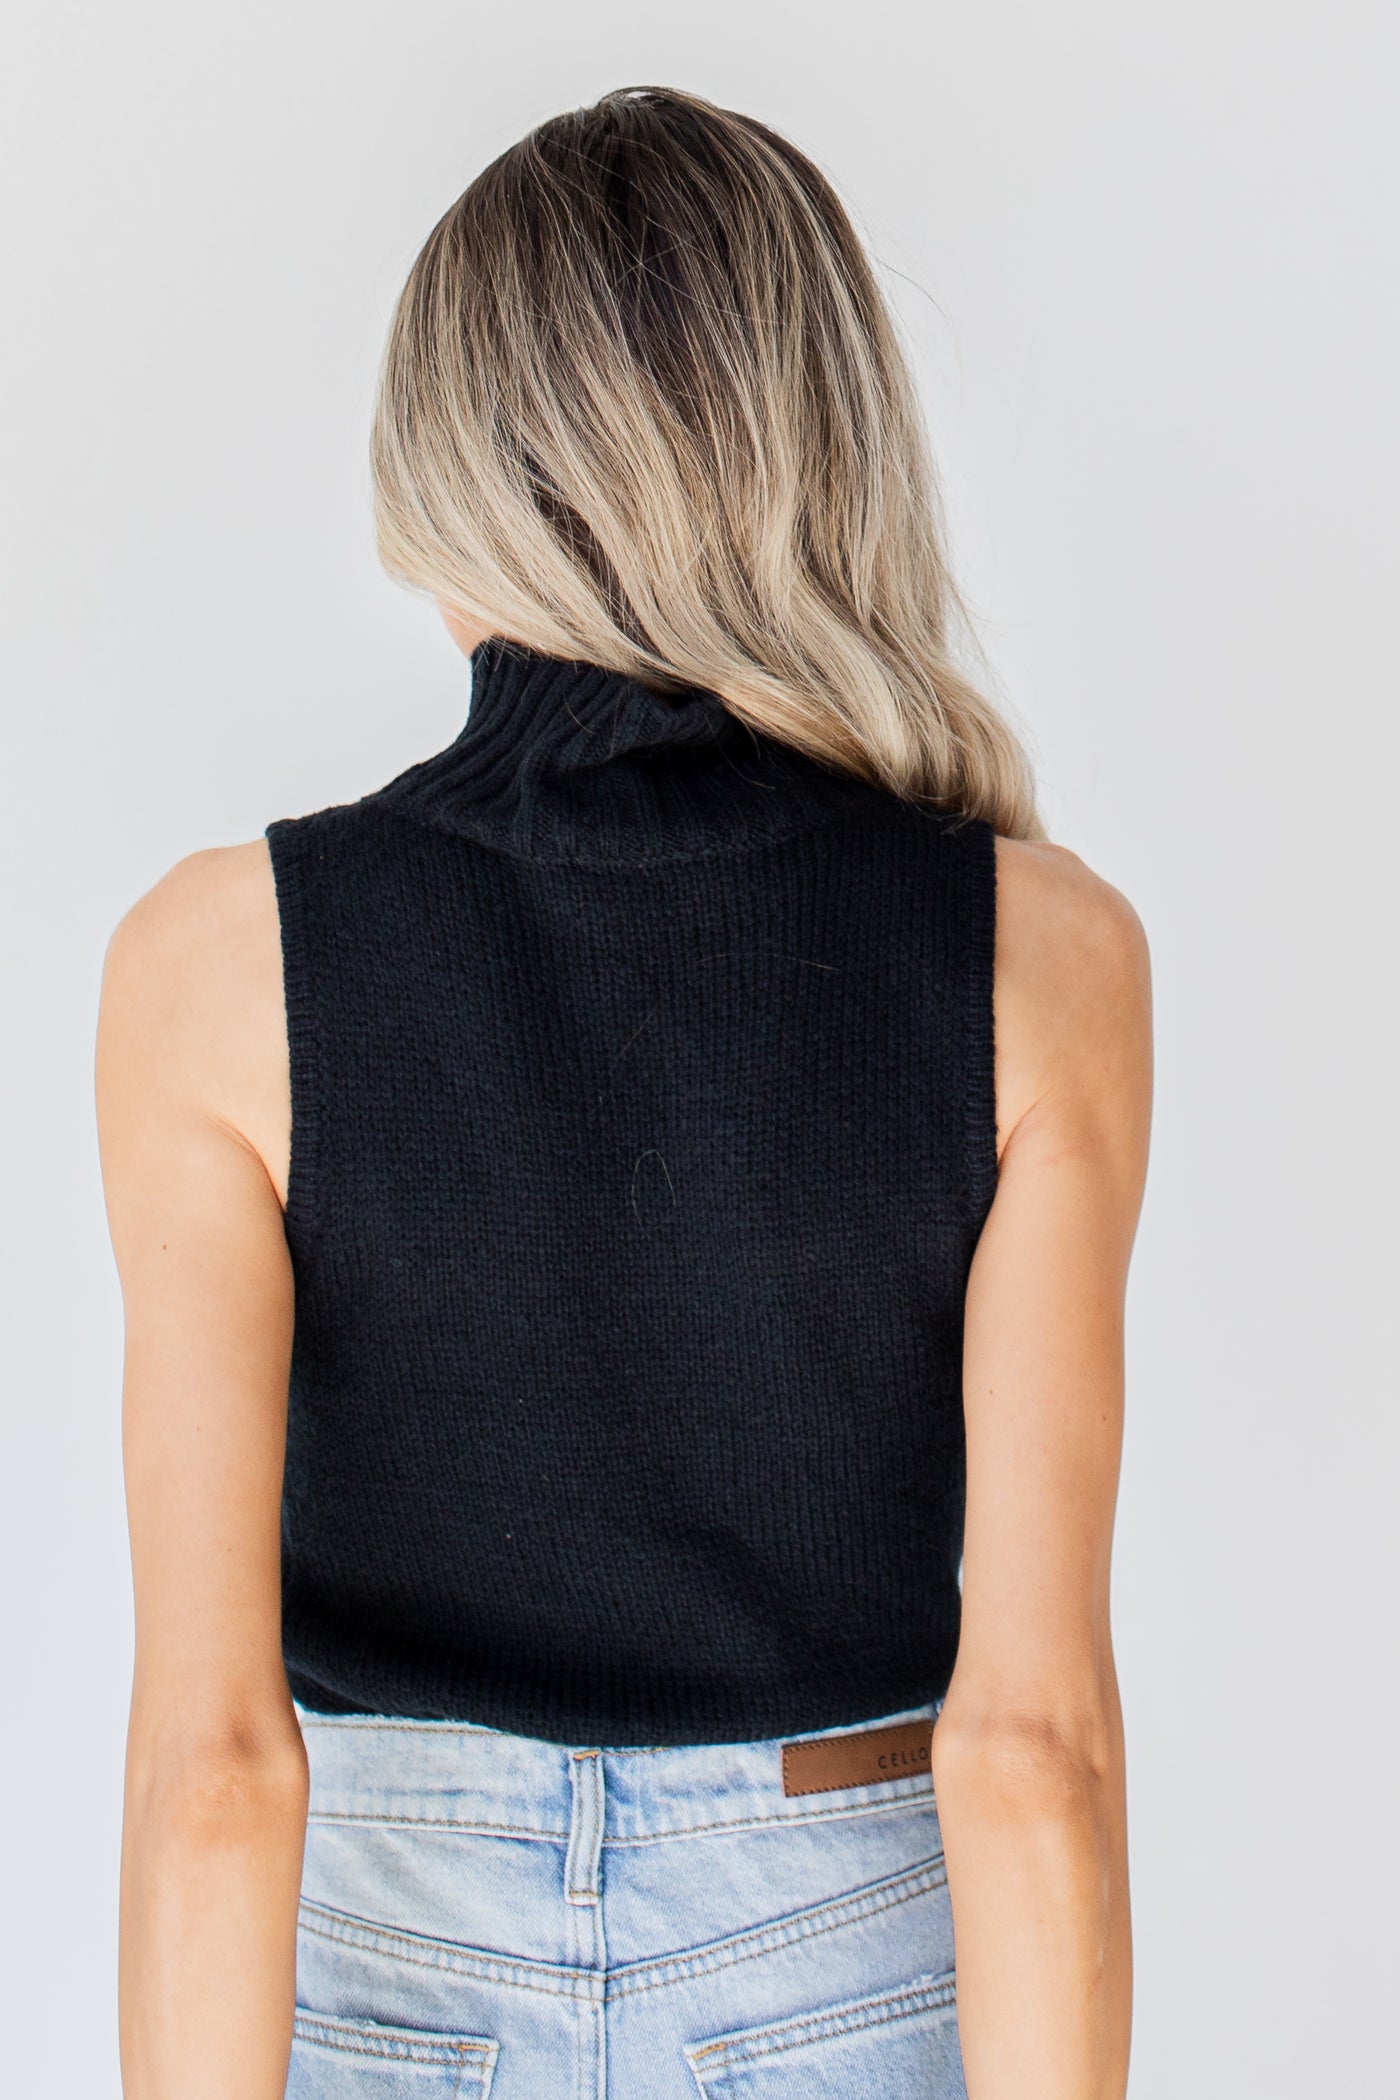 Sweater Tank in black back view